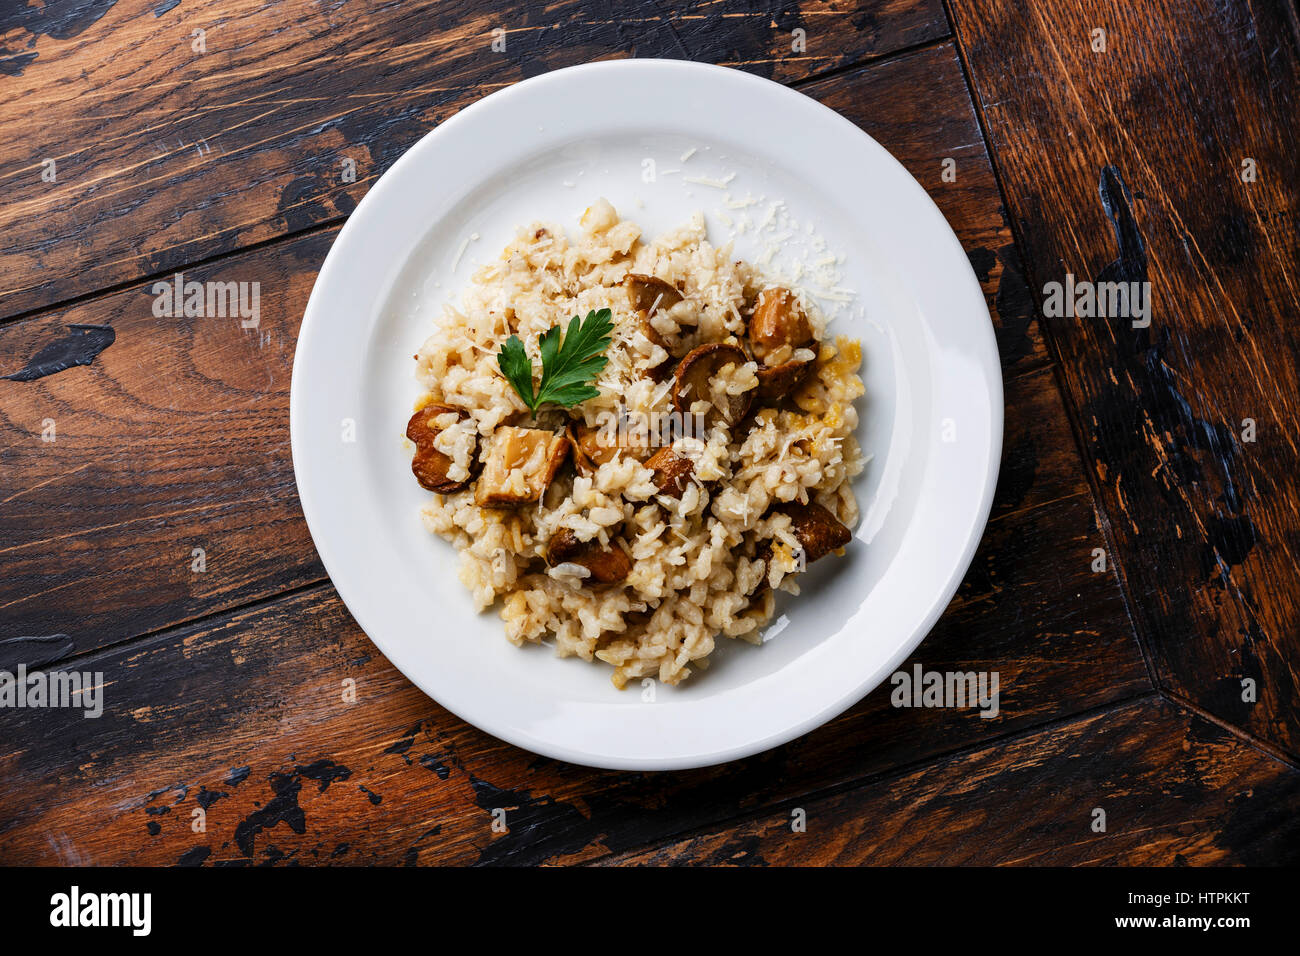 Risotto with porcini mushroom serving size on wooden table Stock Photo